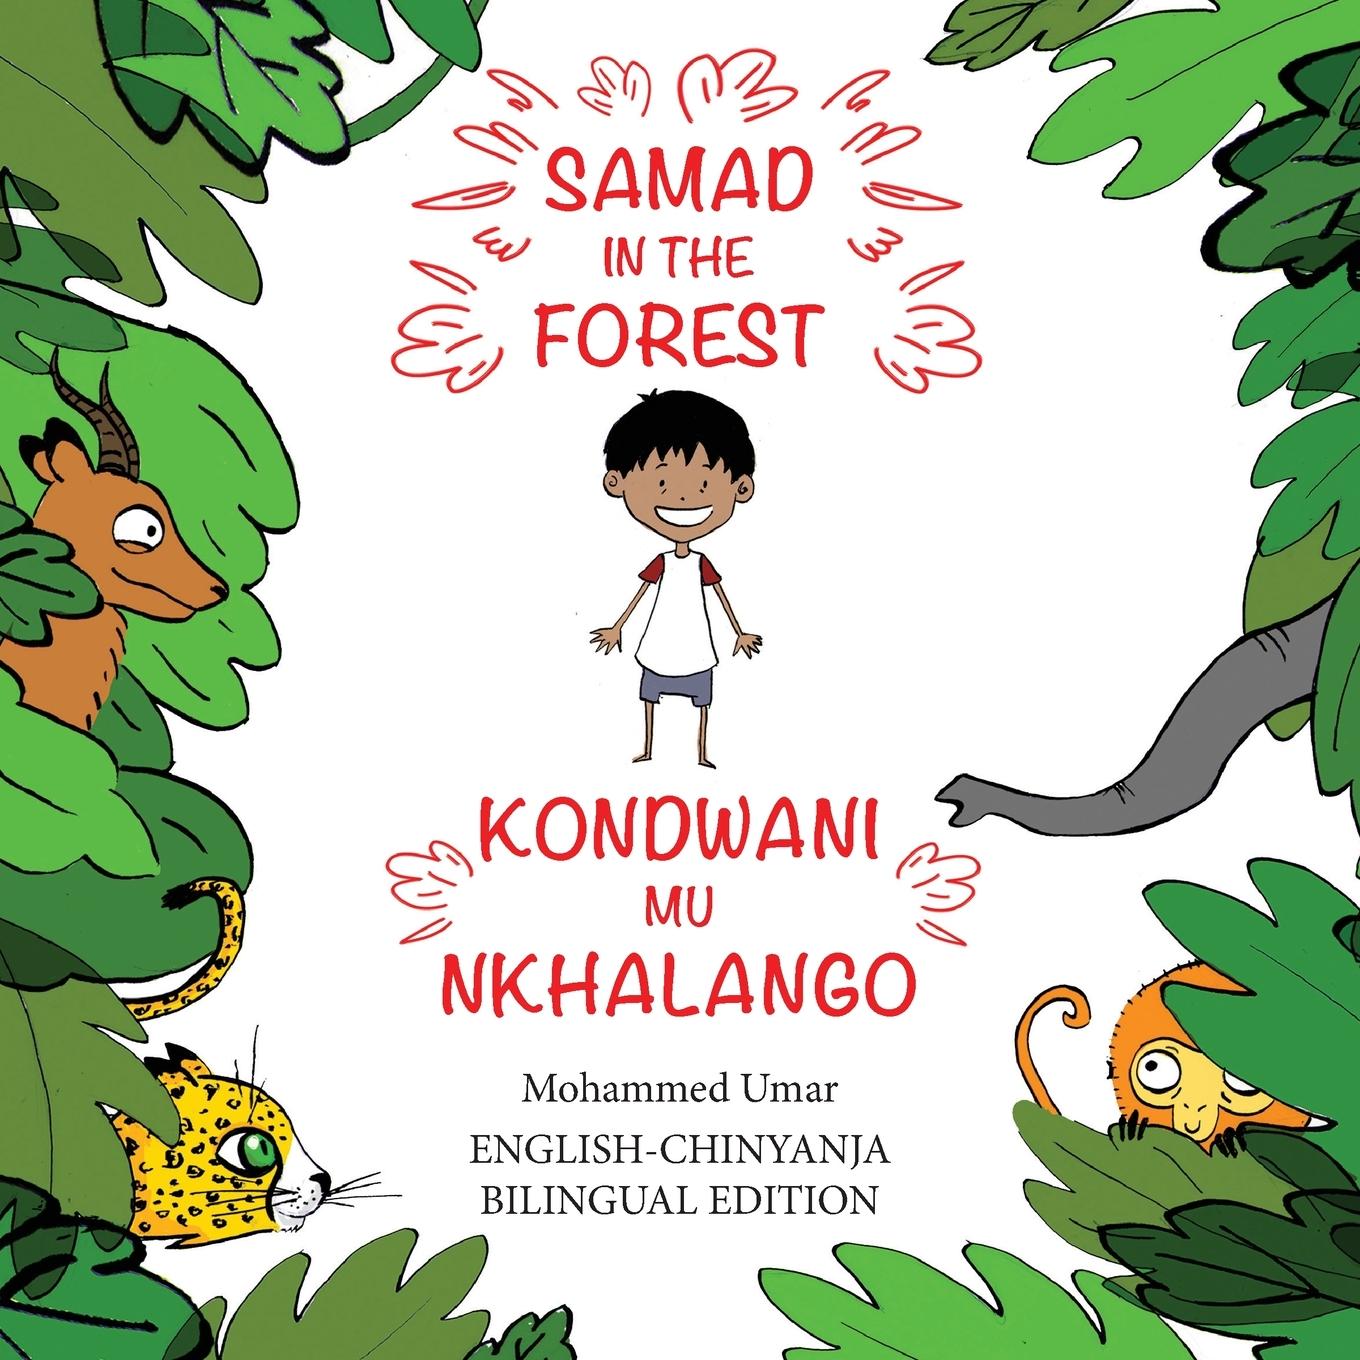 Book Samad in the Forest: English-Chinyanja Bilingual Edition 